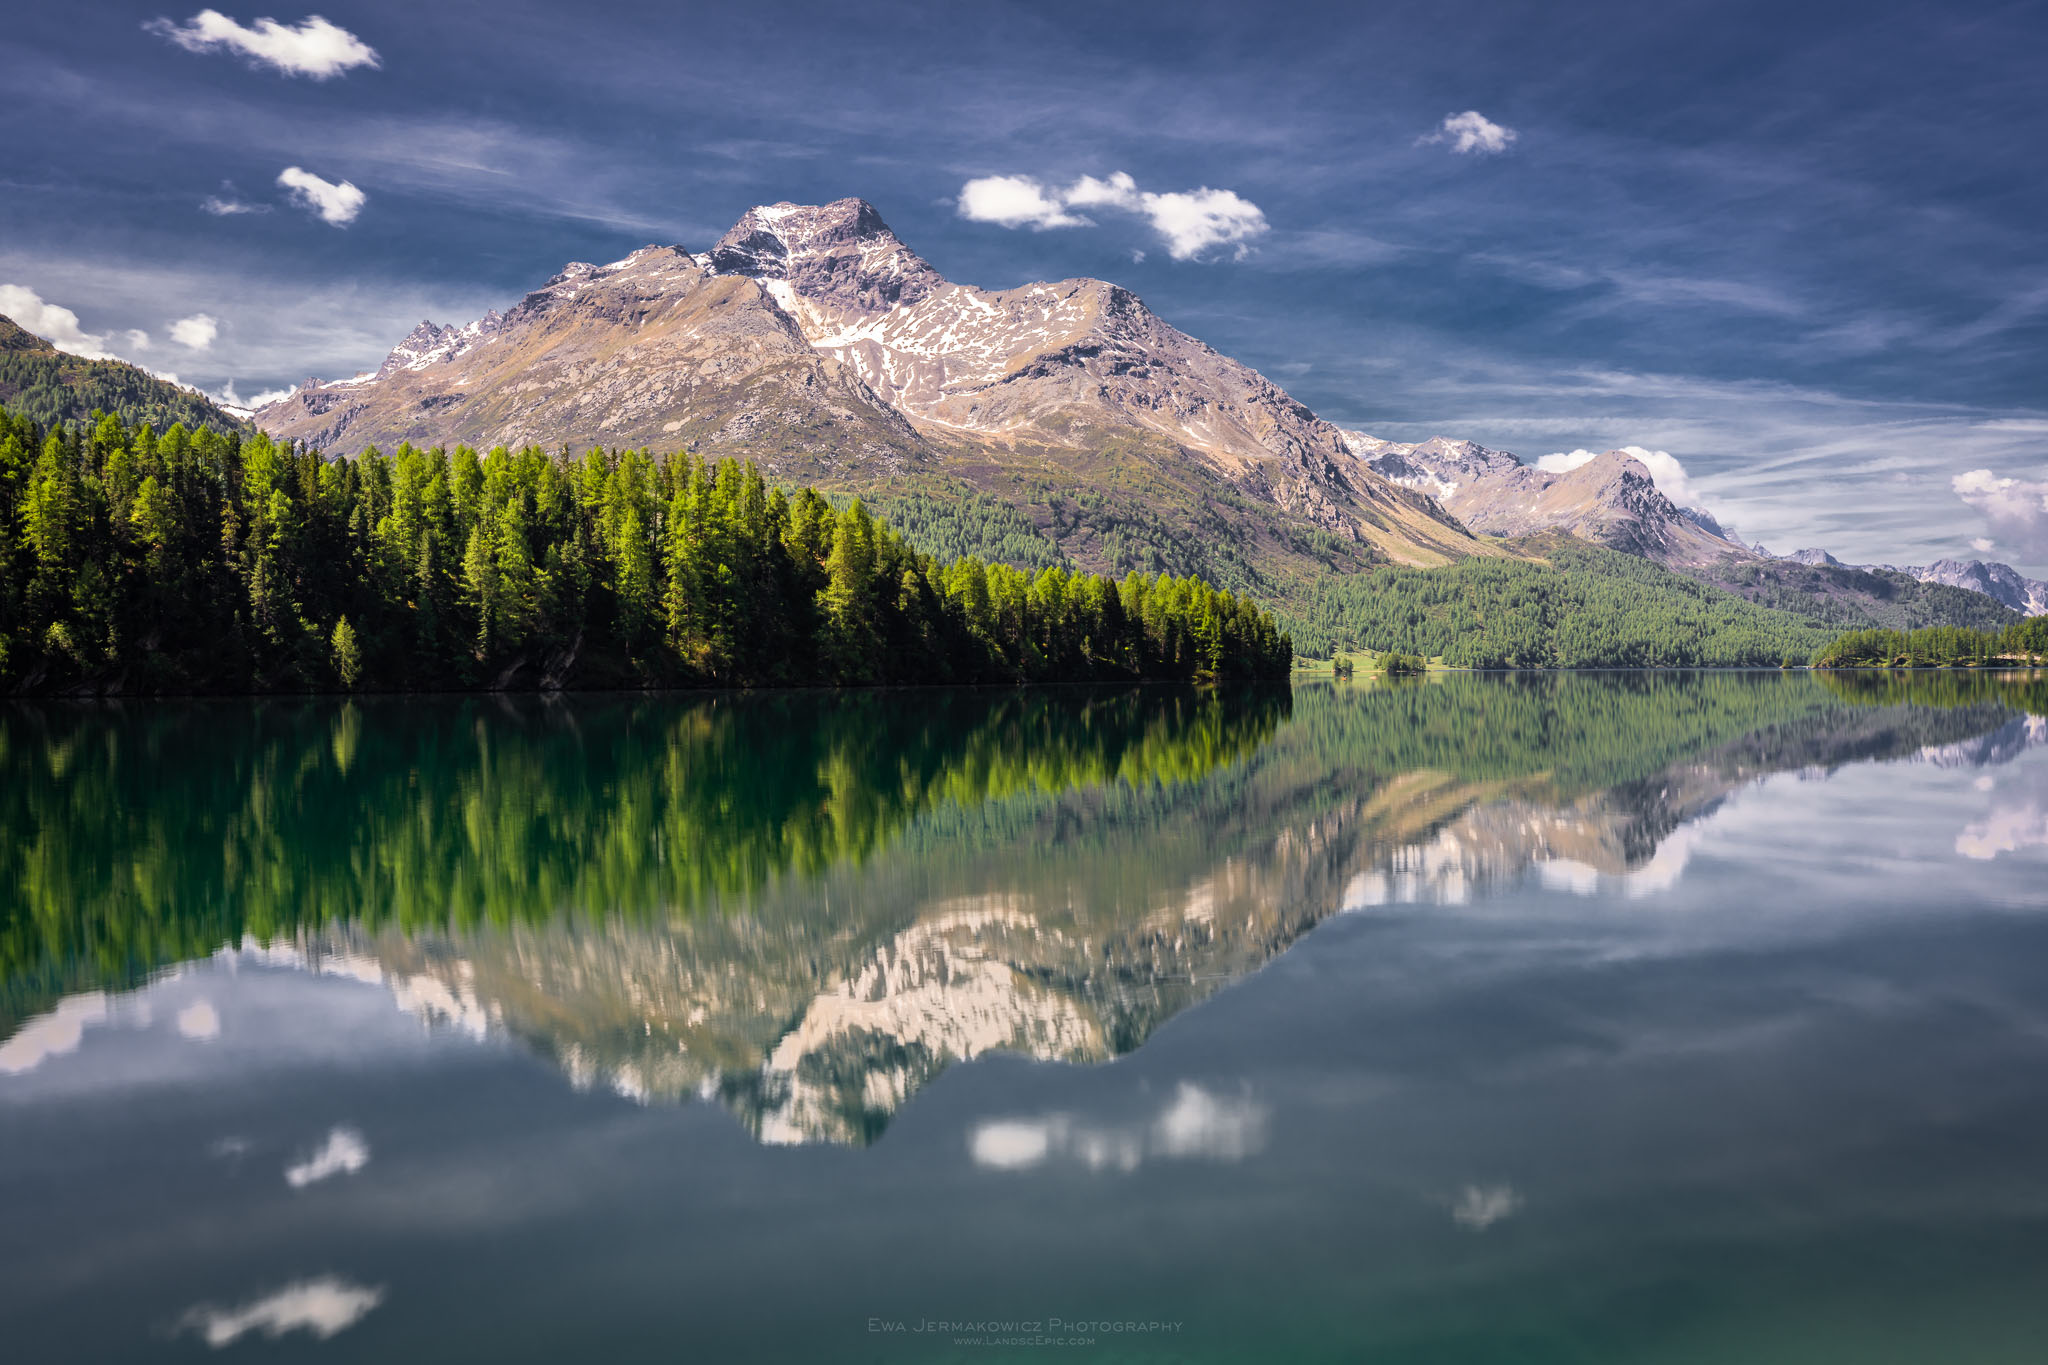 Beautiful photo of mountain reflection in a lake Silsersee in Swiss Alps